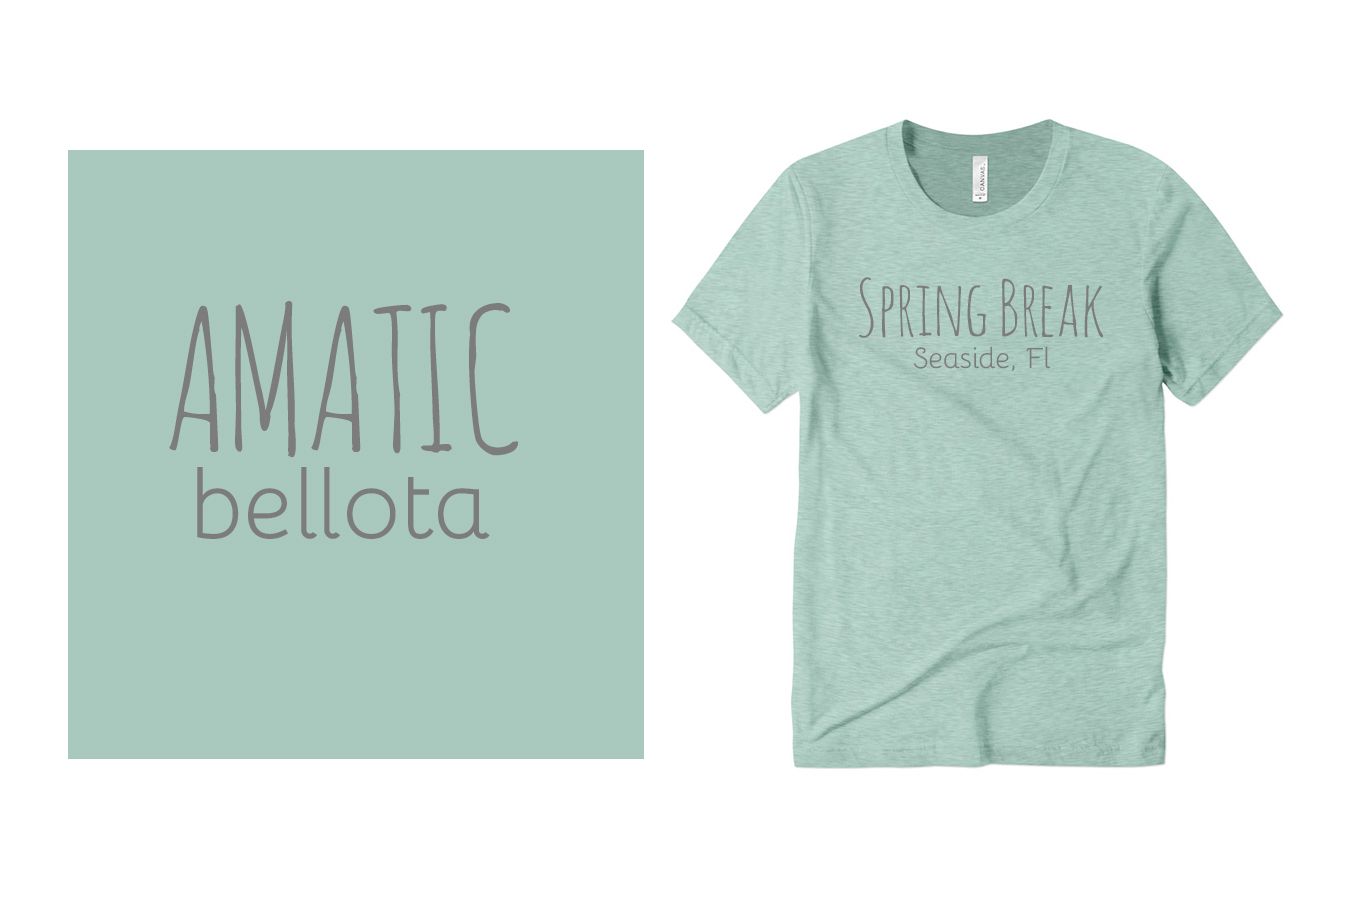 Example font pairing of Amatic and Bellota.